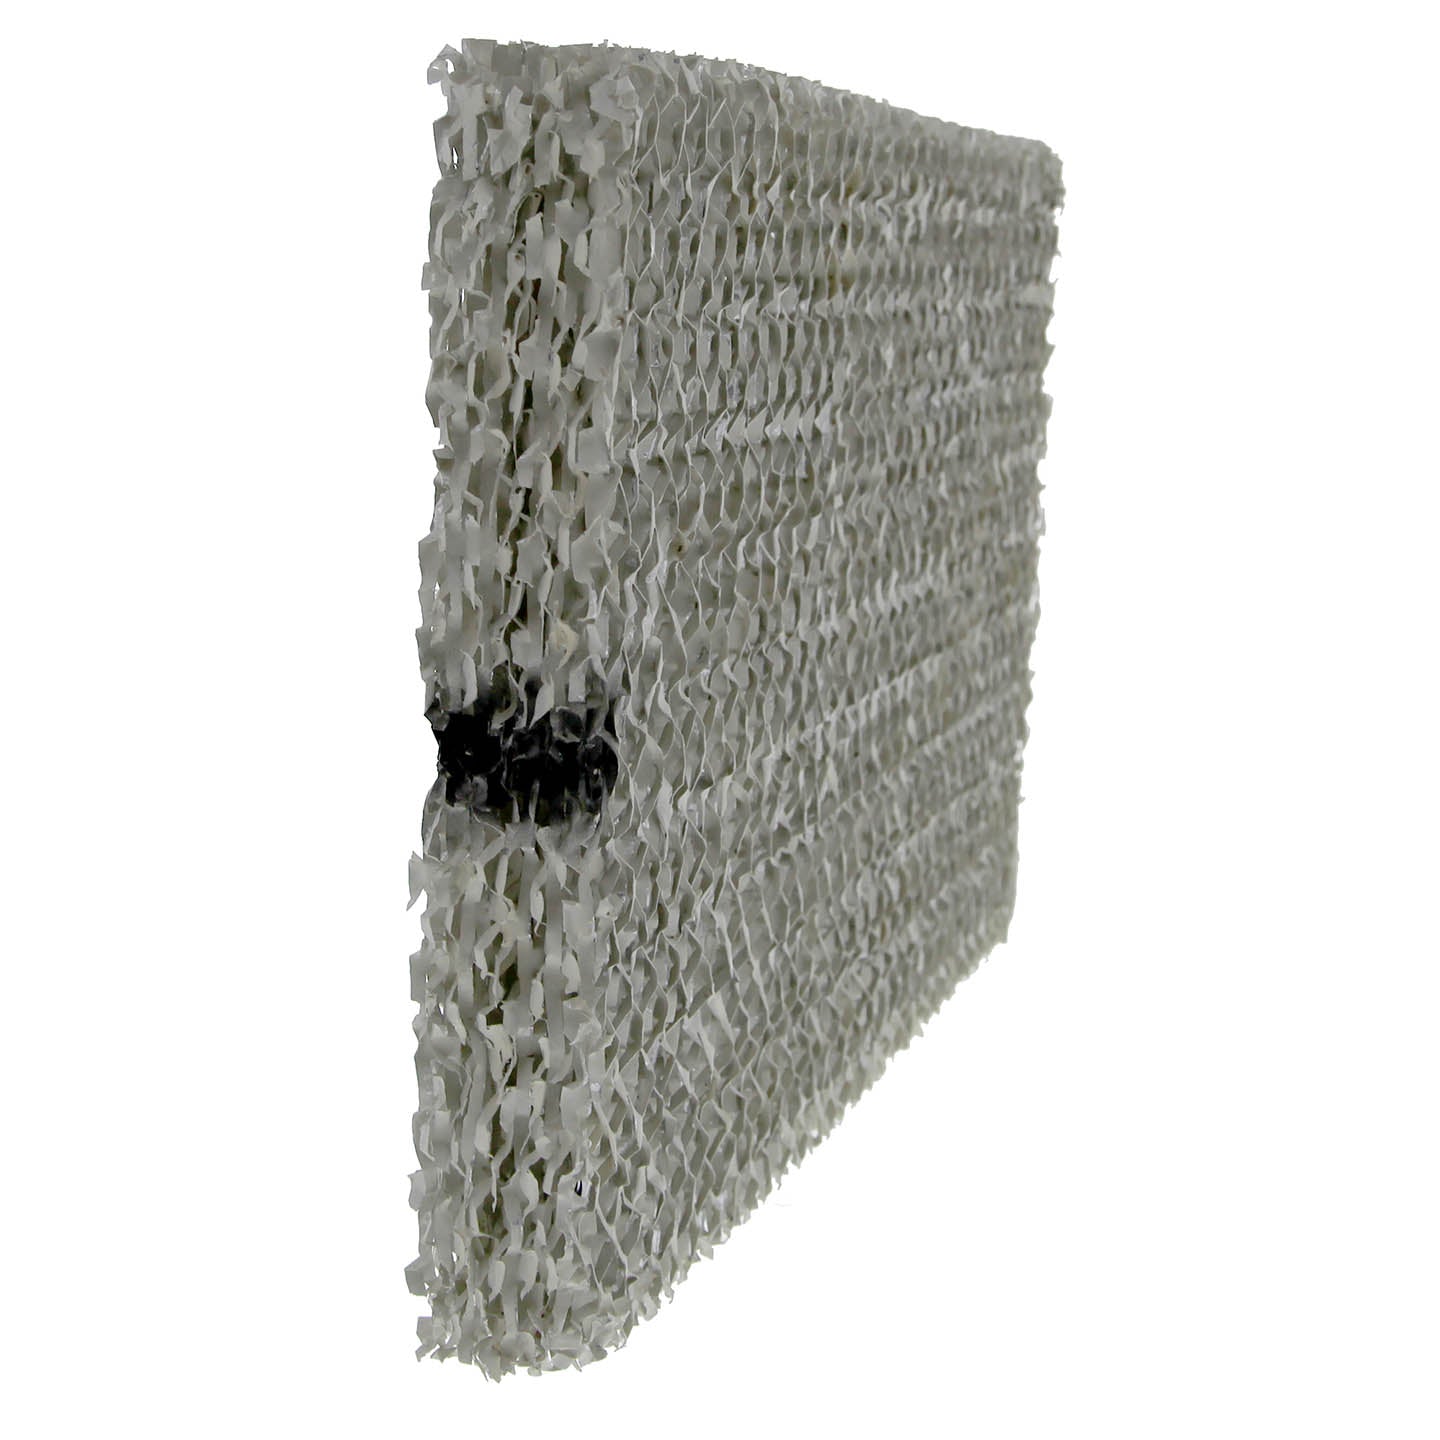 GeneralAire 990-13 Comparable Humidifier Replacement Filter by Tier1